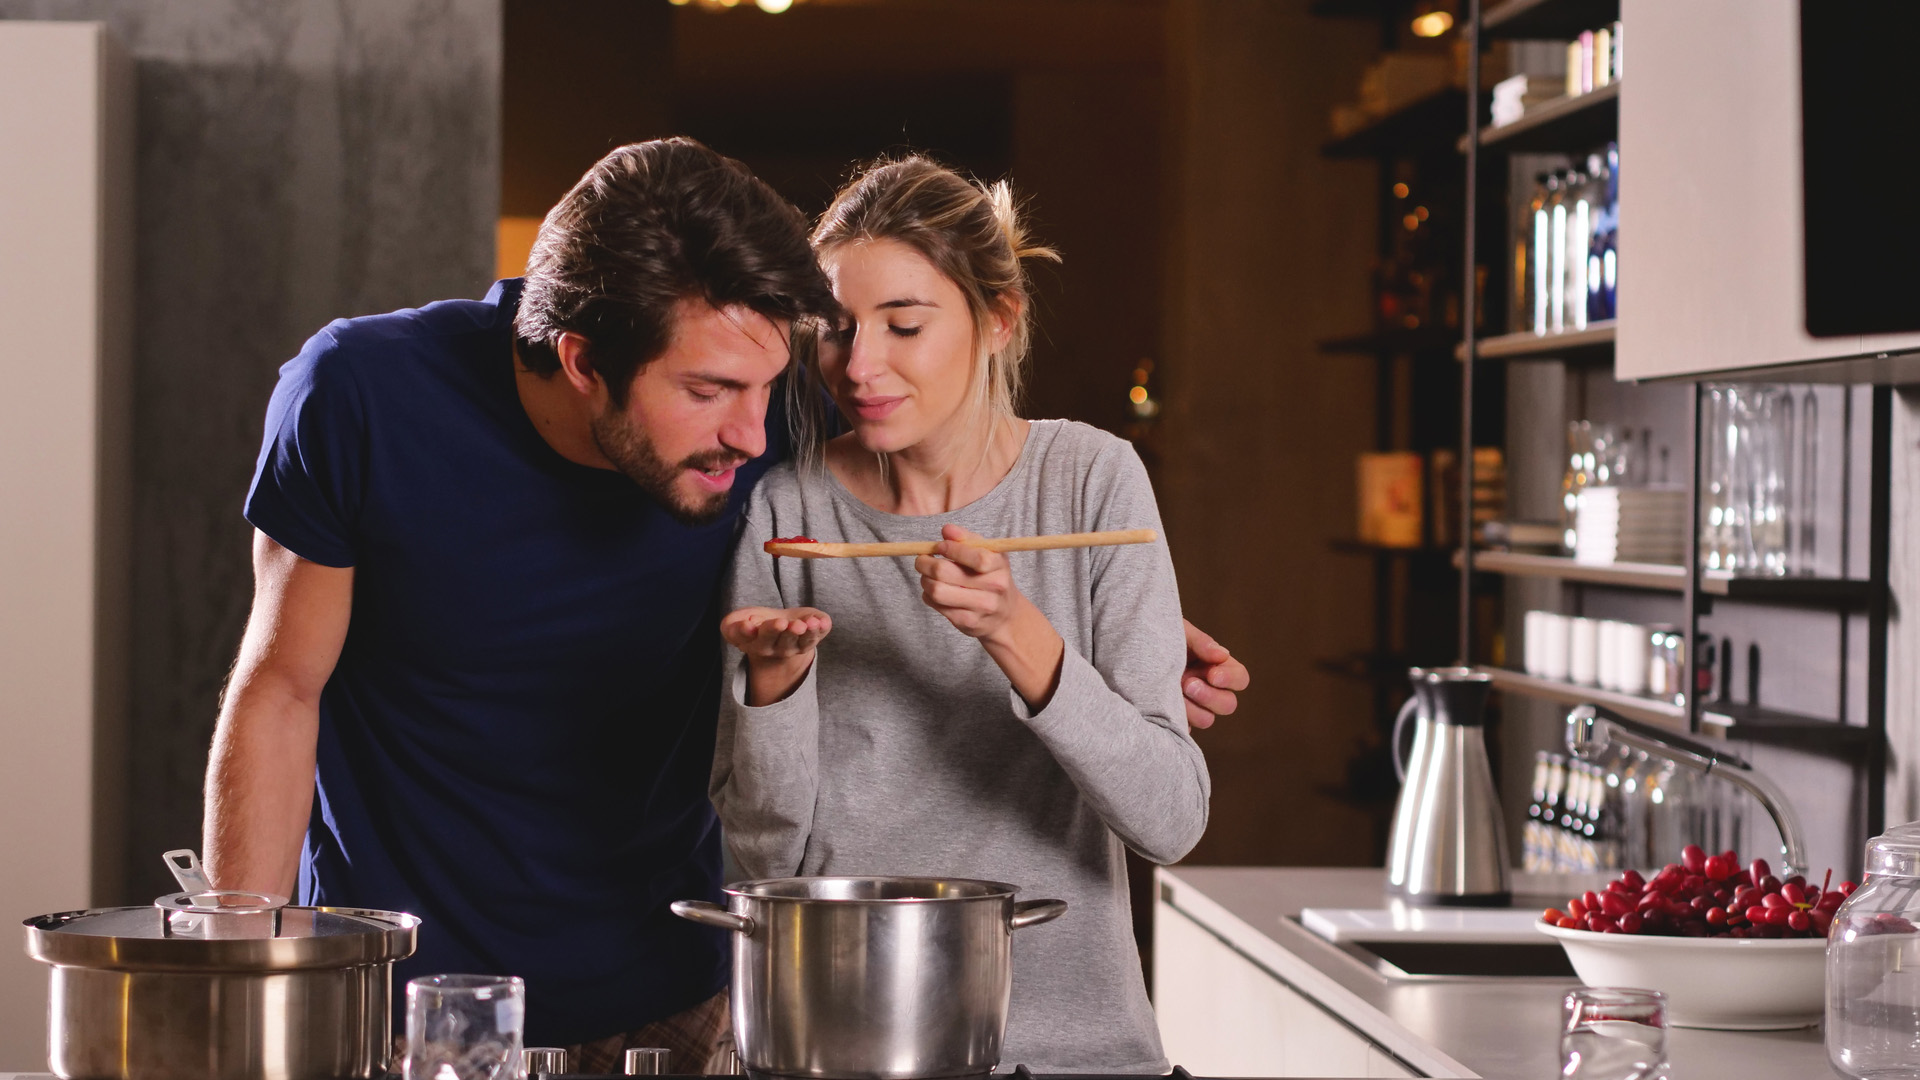 Brunette man in navy t-shirt being fed red sauce from cooking spoon by blonde woman in grey t-shirt. They are in the kitchen.